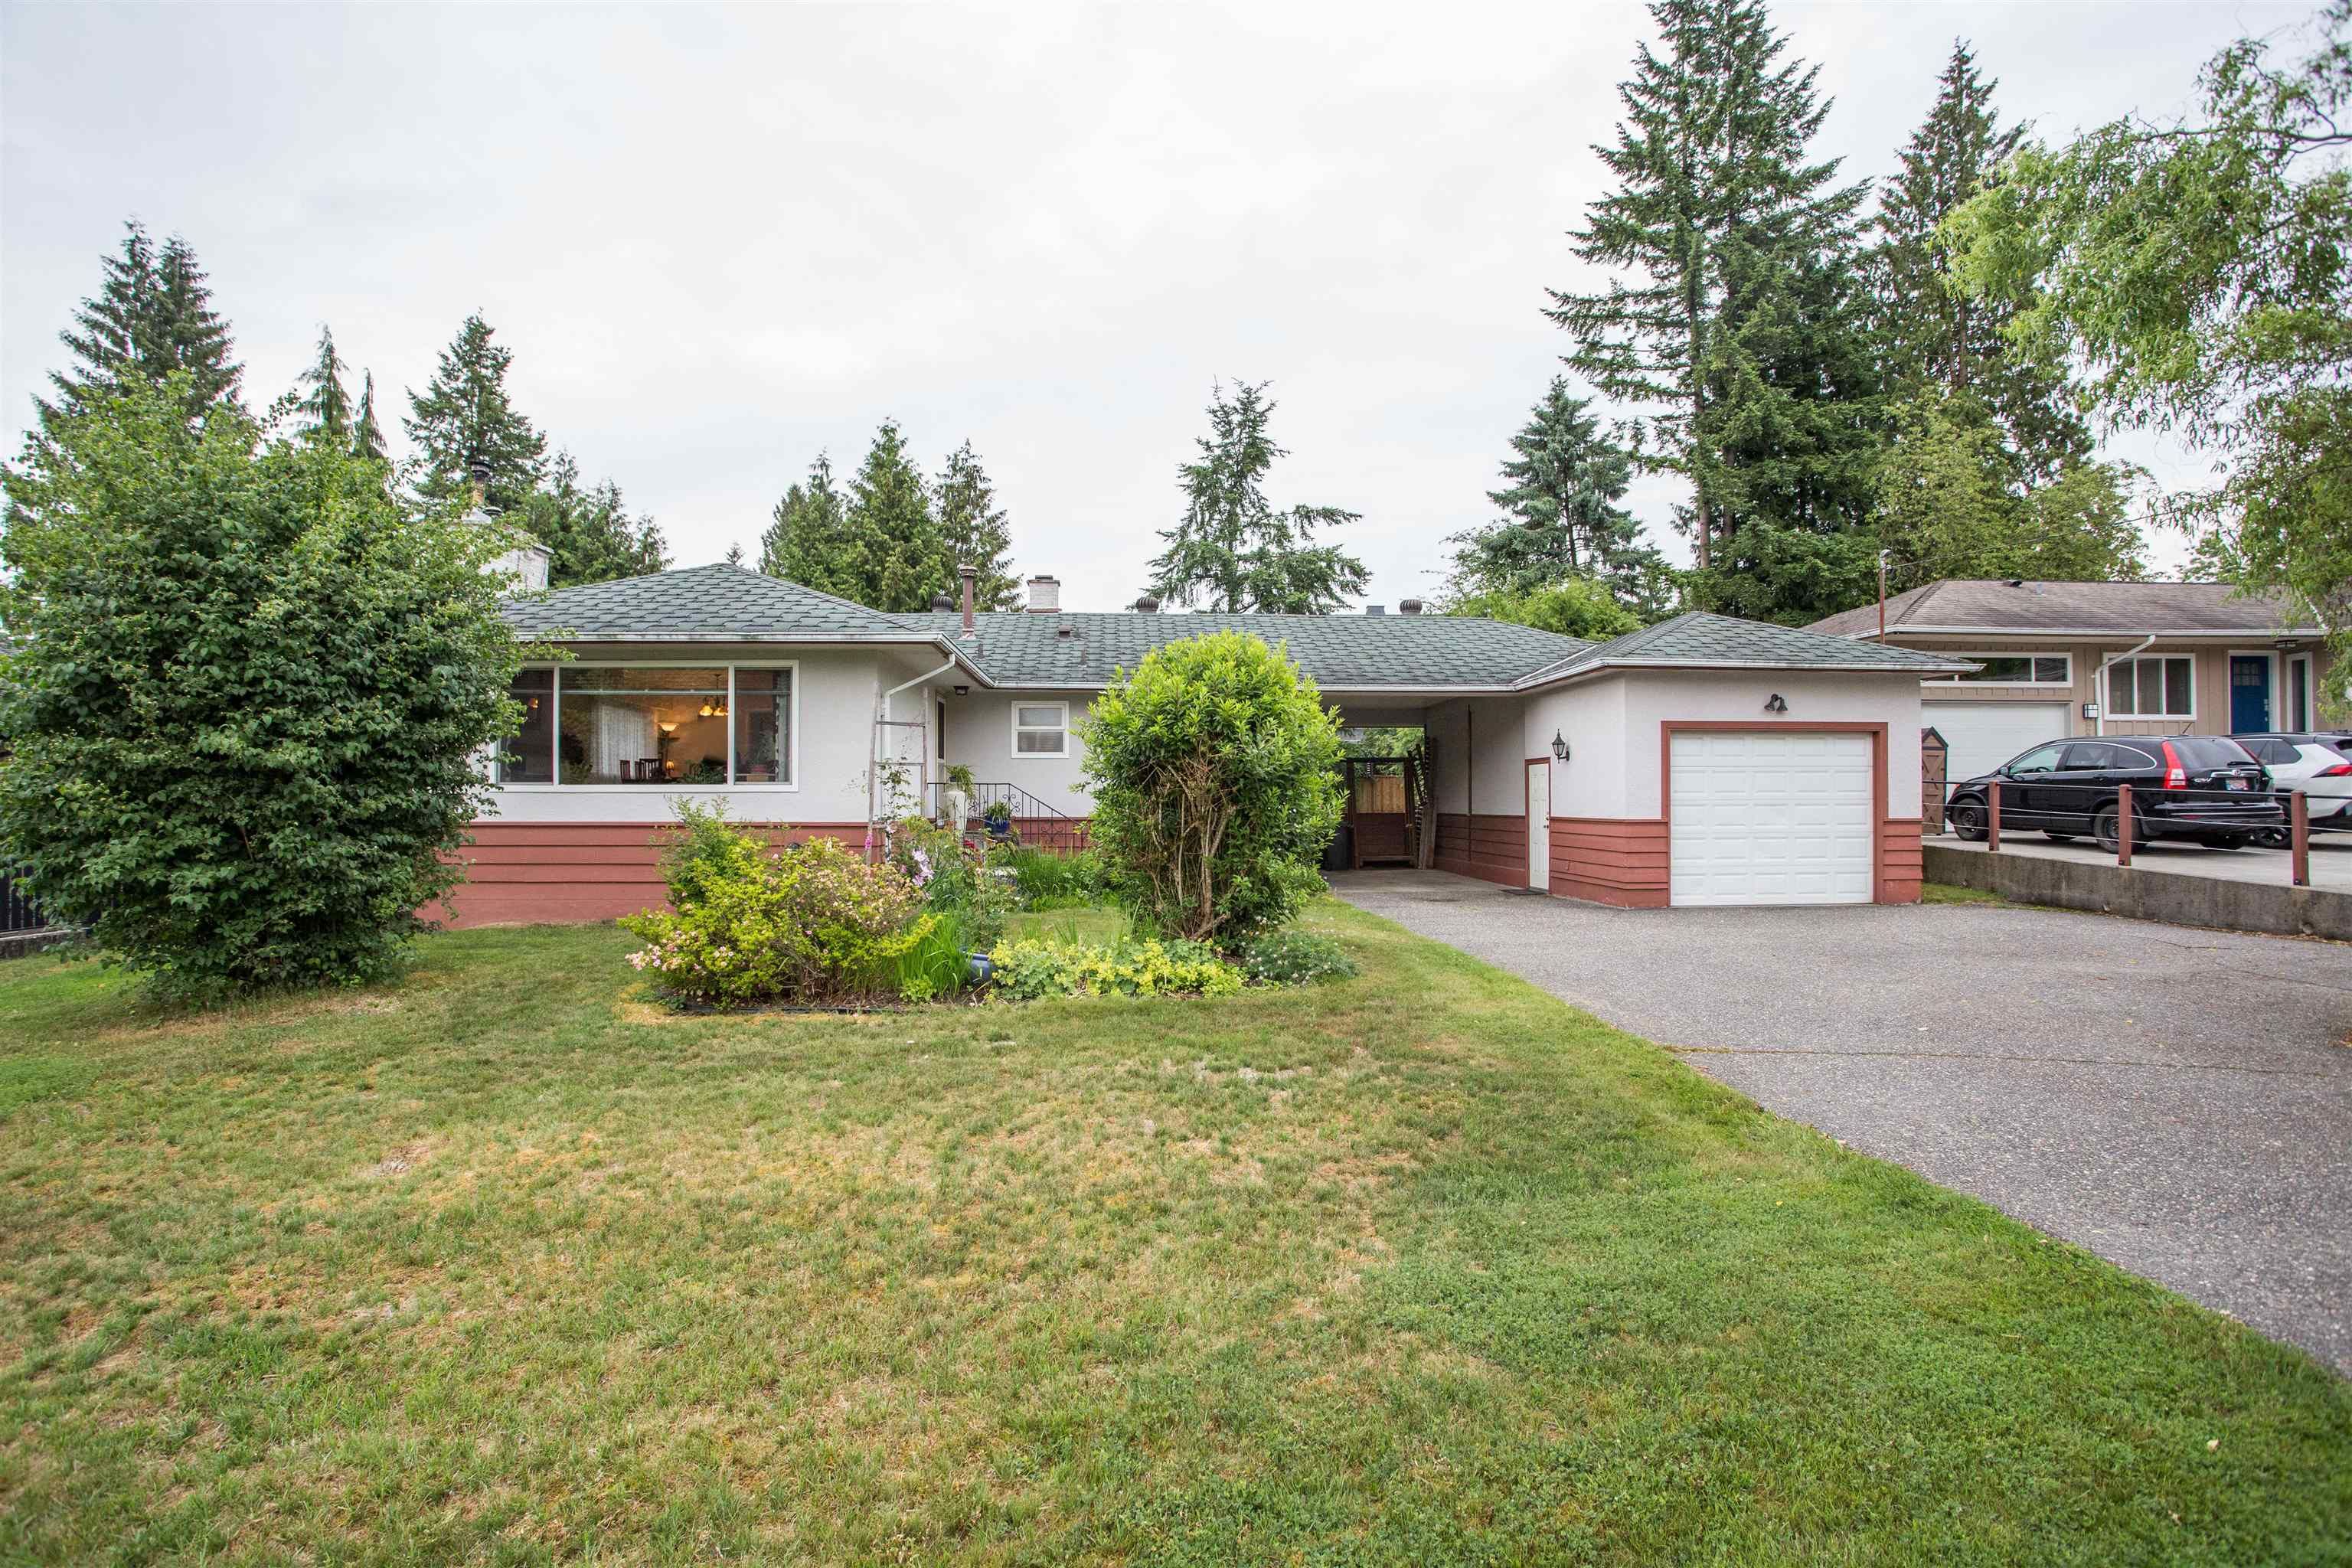 This property has sold: 926 CRESTWOOD DR in Coquitlam